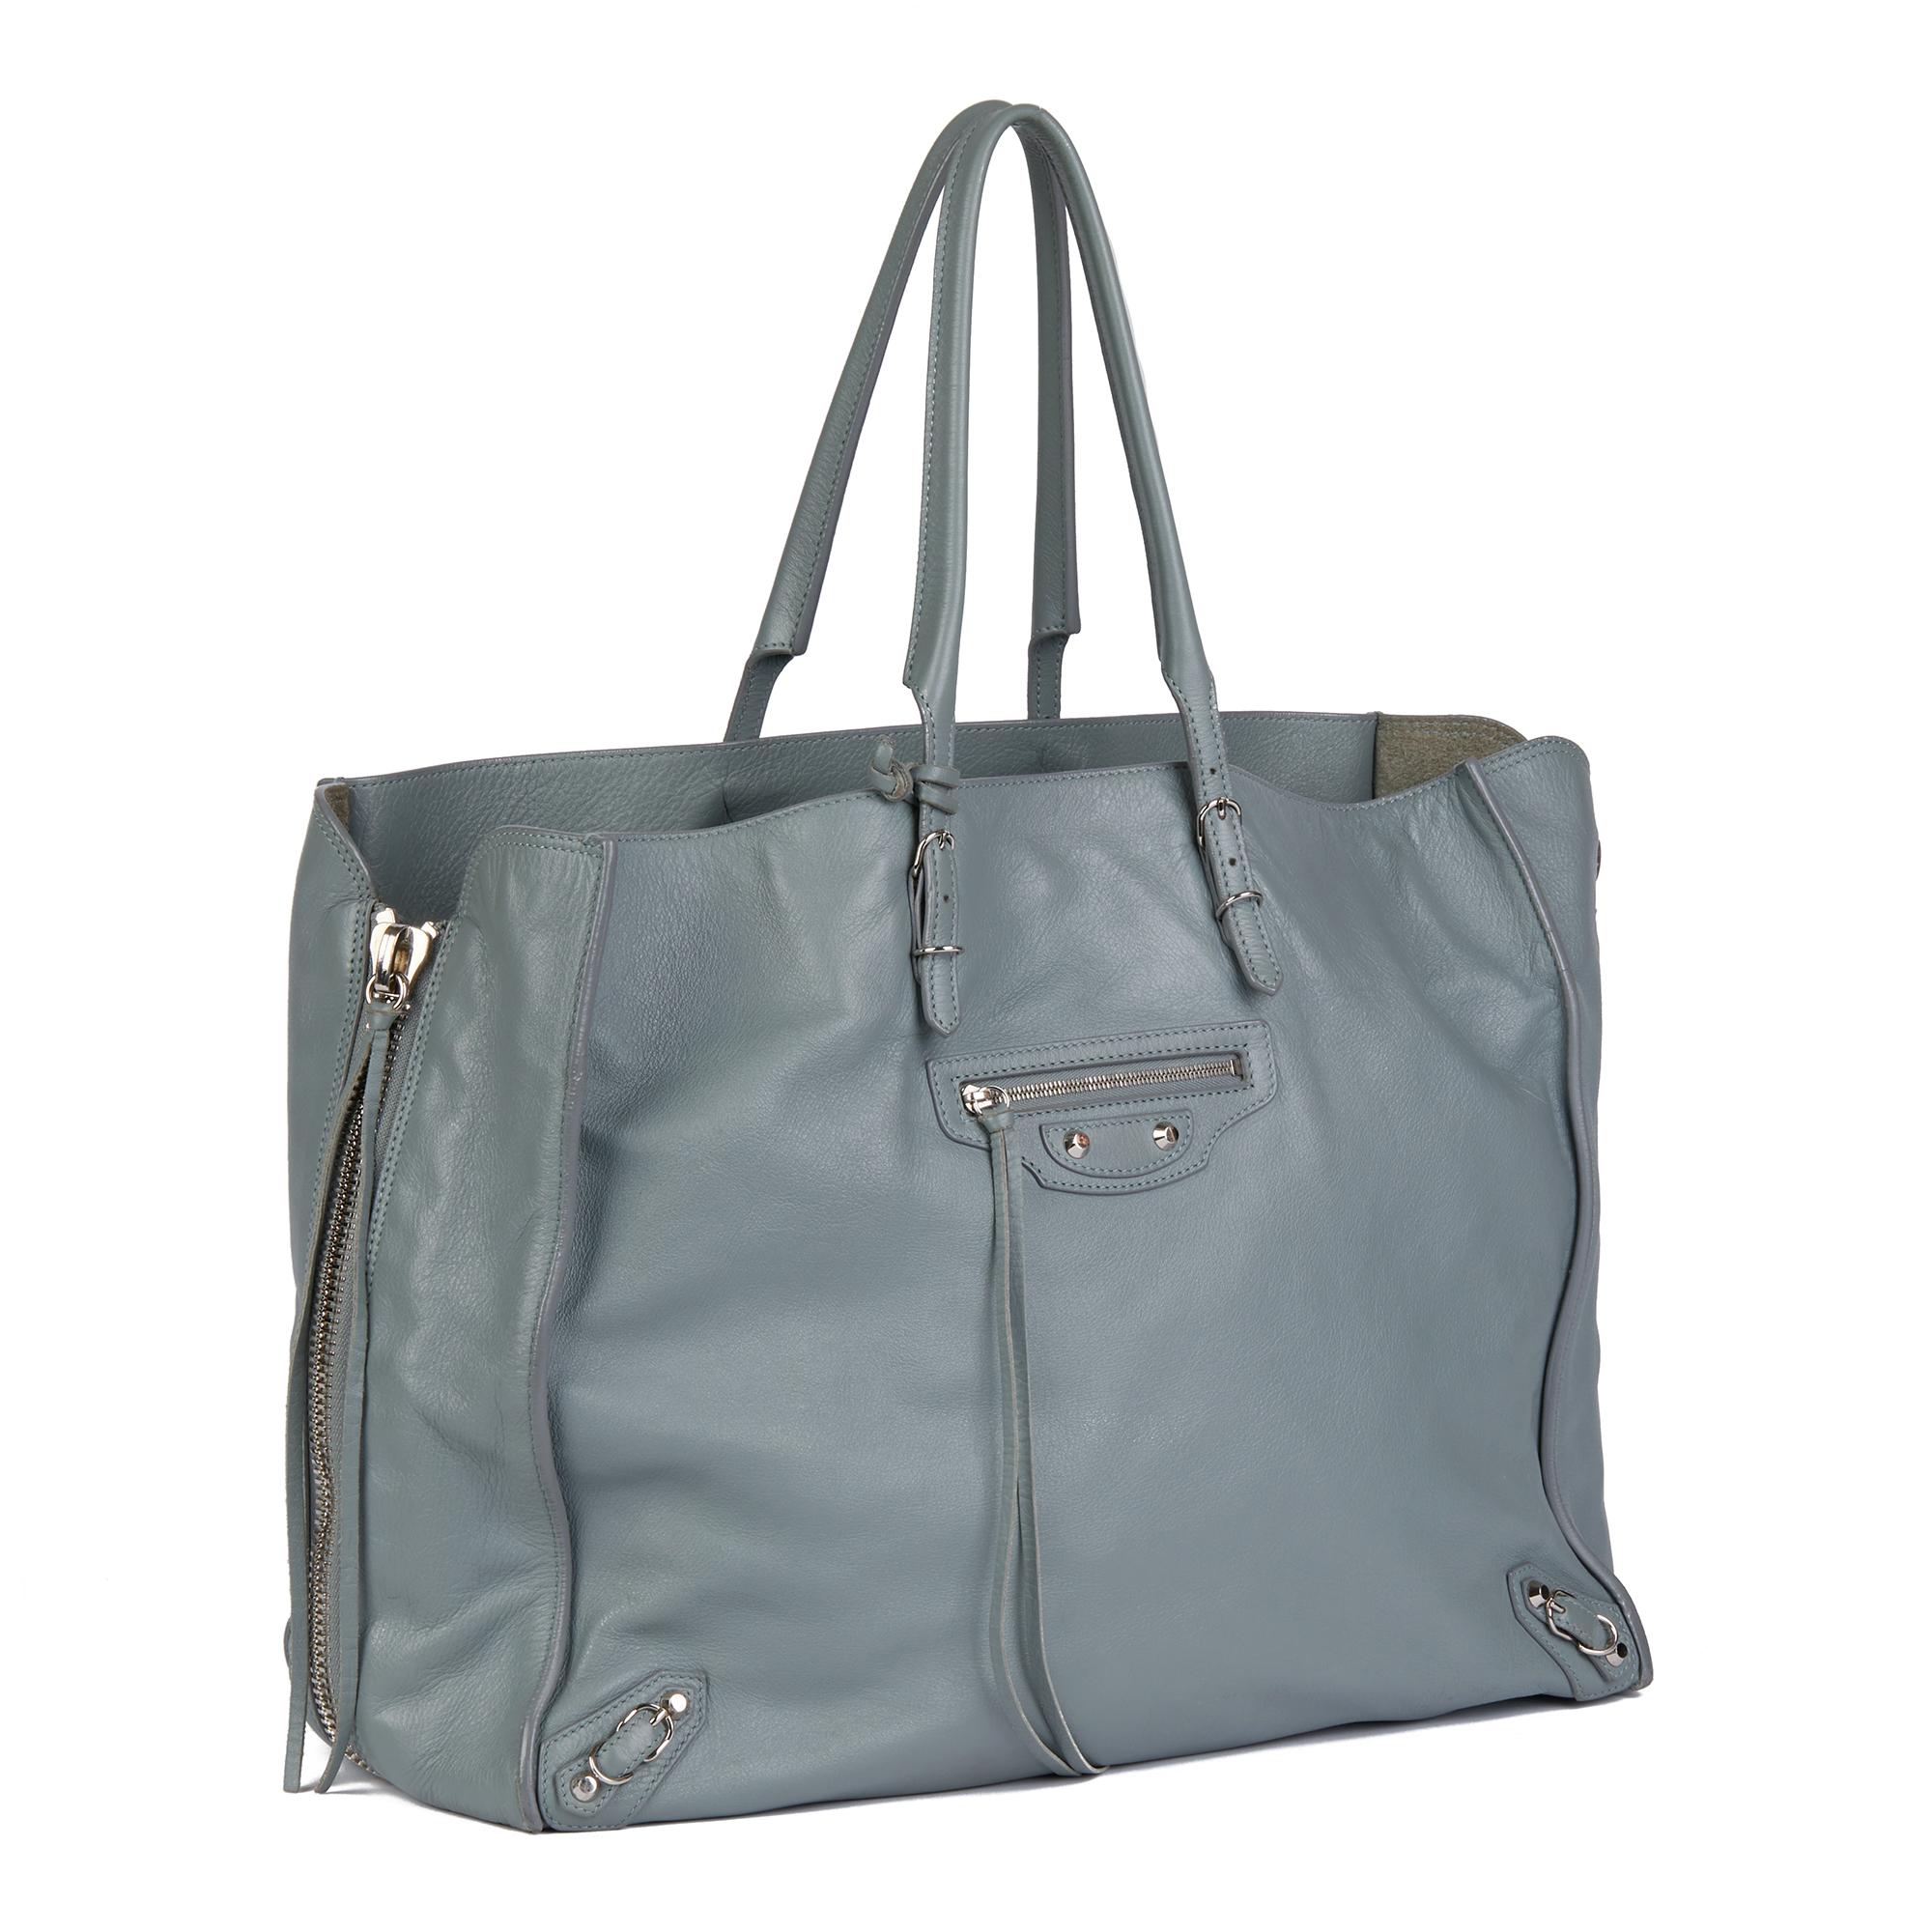 BALENCIAGA
Gris Glace Lambskin Zip Around Papier A4 Tote

Serial Number: 357331-1310-G-1669
Age (Circa): 2015
Accompanied By: Mirror
Authenticity Details: Serial Stamp (Made in Italy)
Gender: Ladies
Type: Tote, Shoulder, Shopper

Colour: Gris Glace